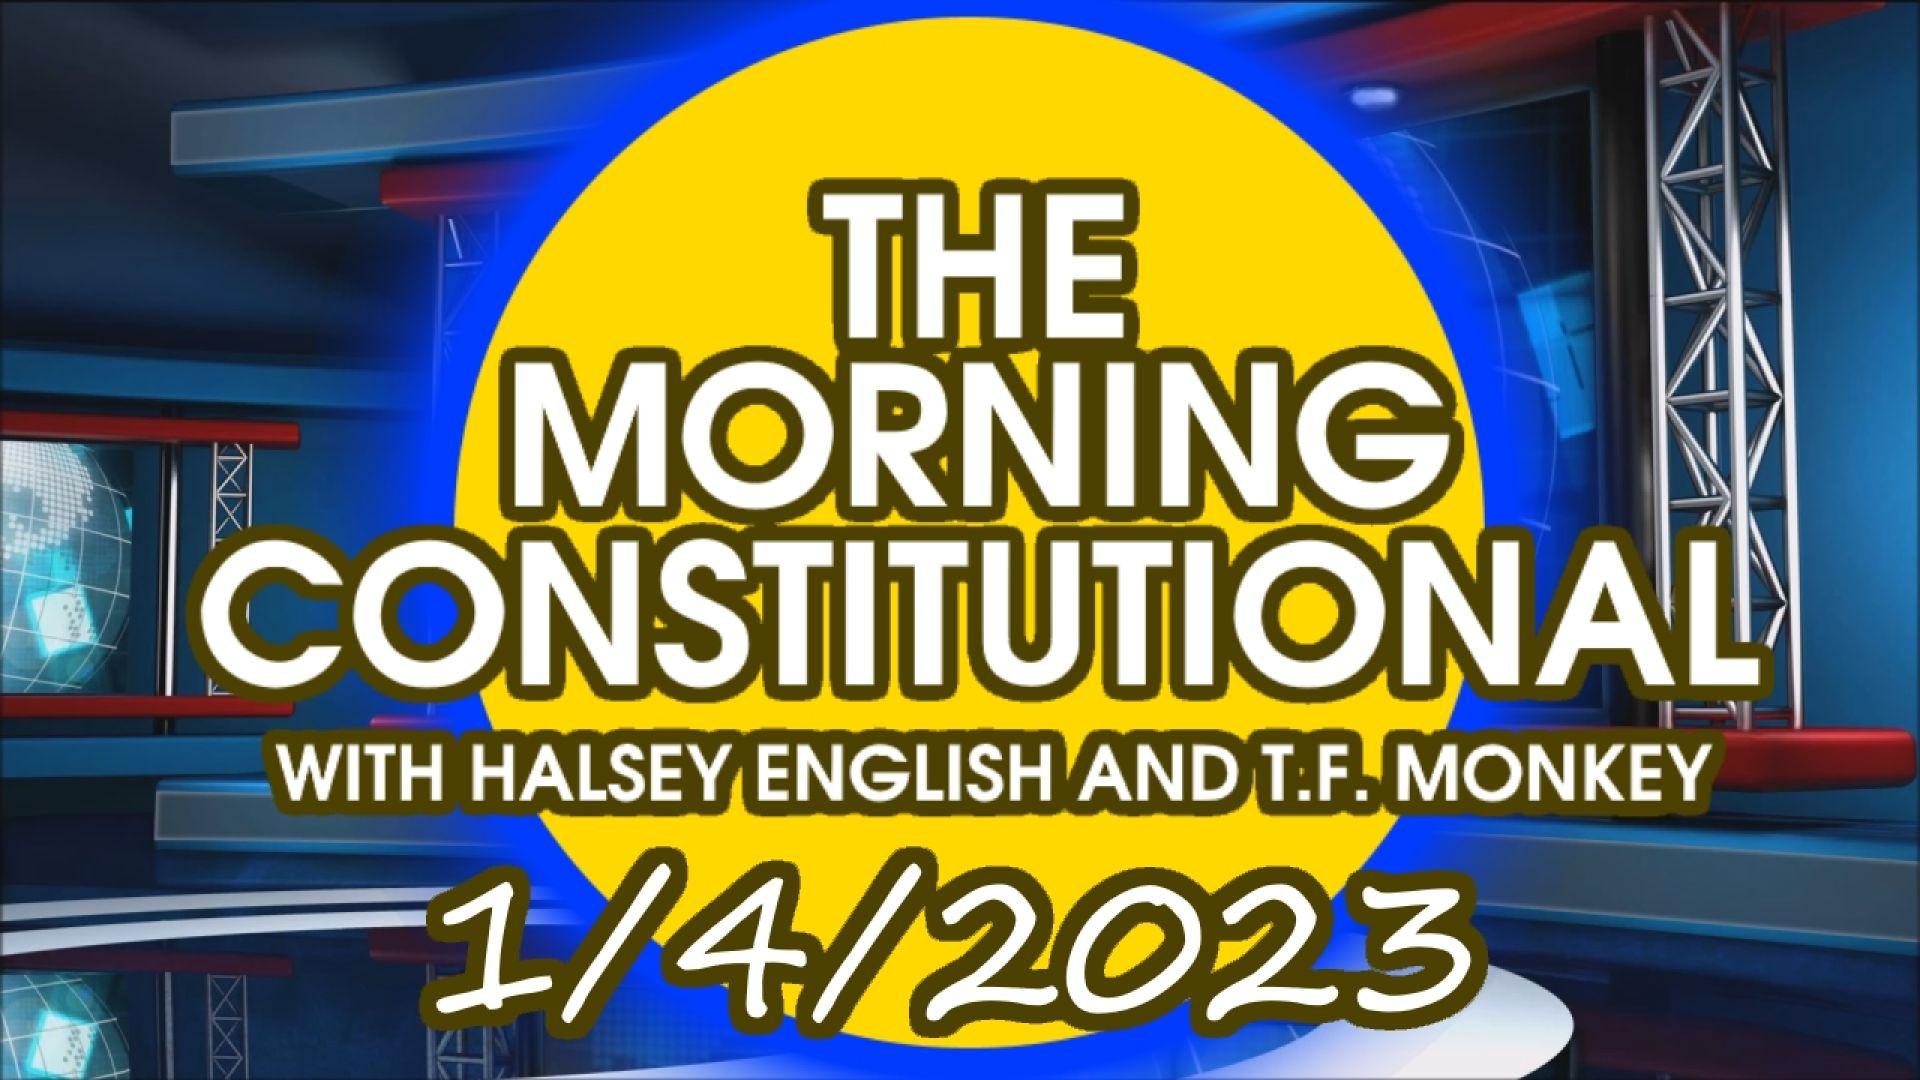 The Morning Constitutional: 1/4/2023